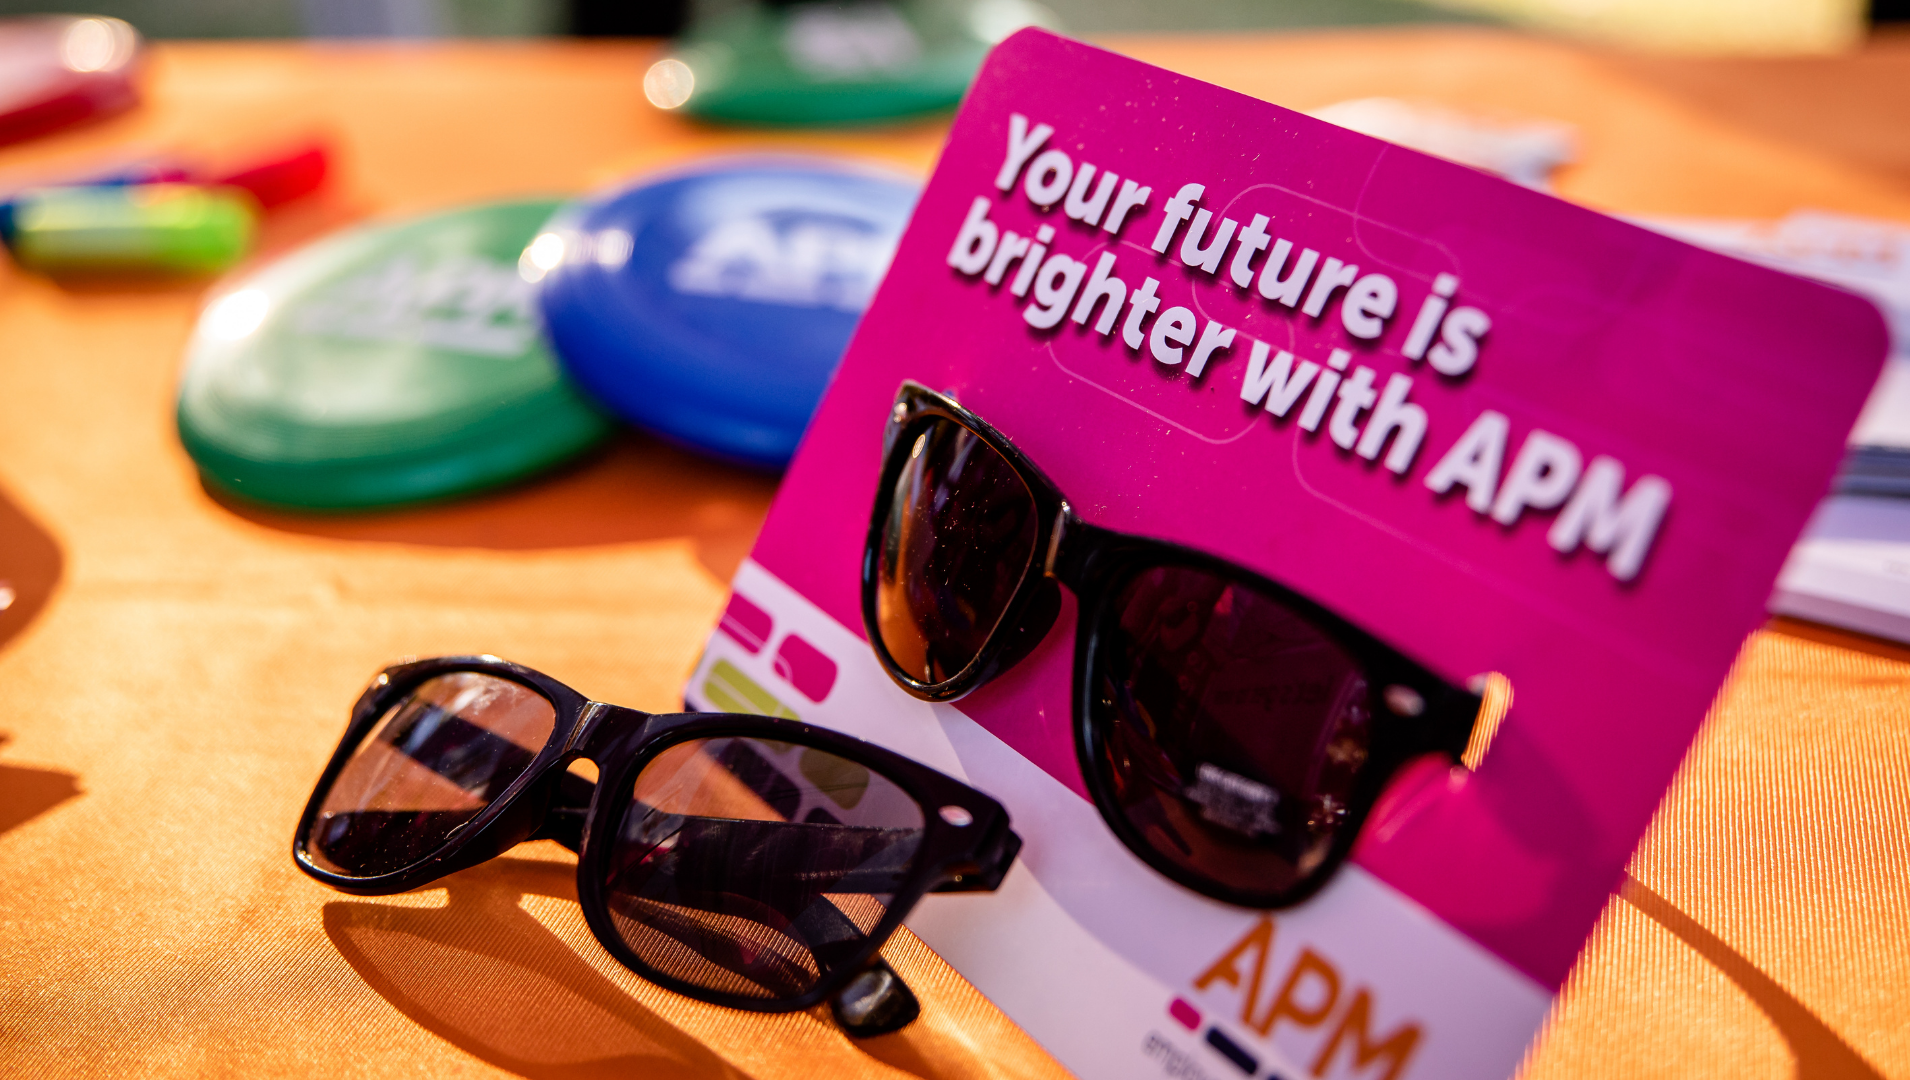 Table covered with APM branded paraphernalia, with the wording "Your future is brighter with APM" in the foreground